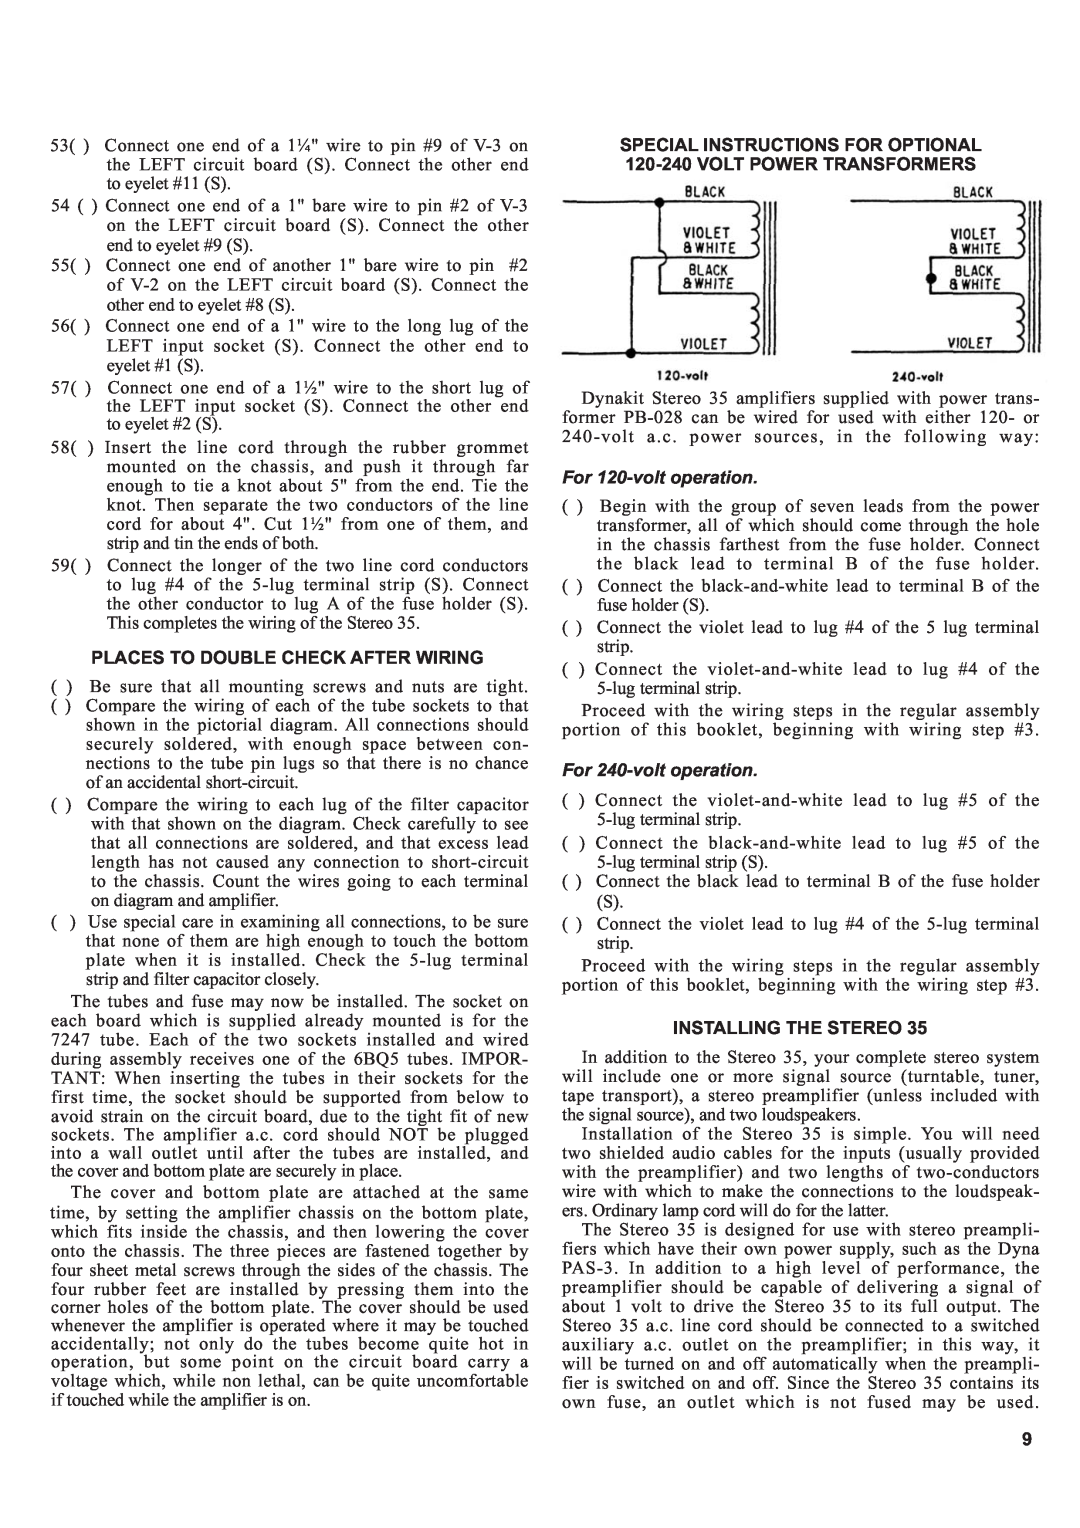 Audio Dynamics 14635013 manual Places To Double Check After Wiring, Installing The Stereo, For 120-volt operation 